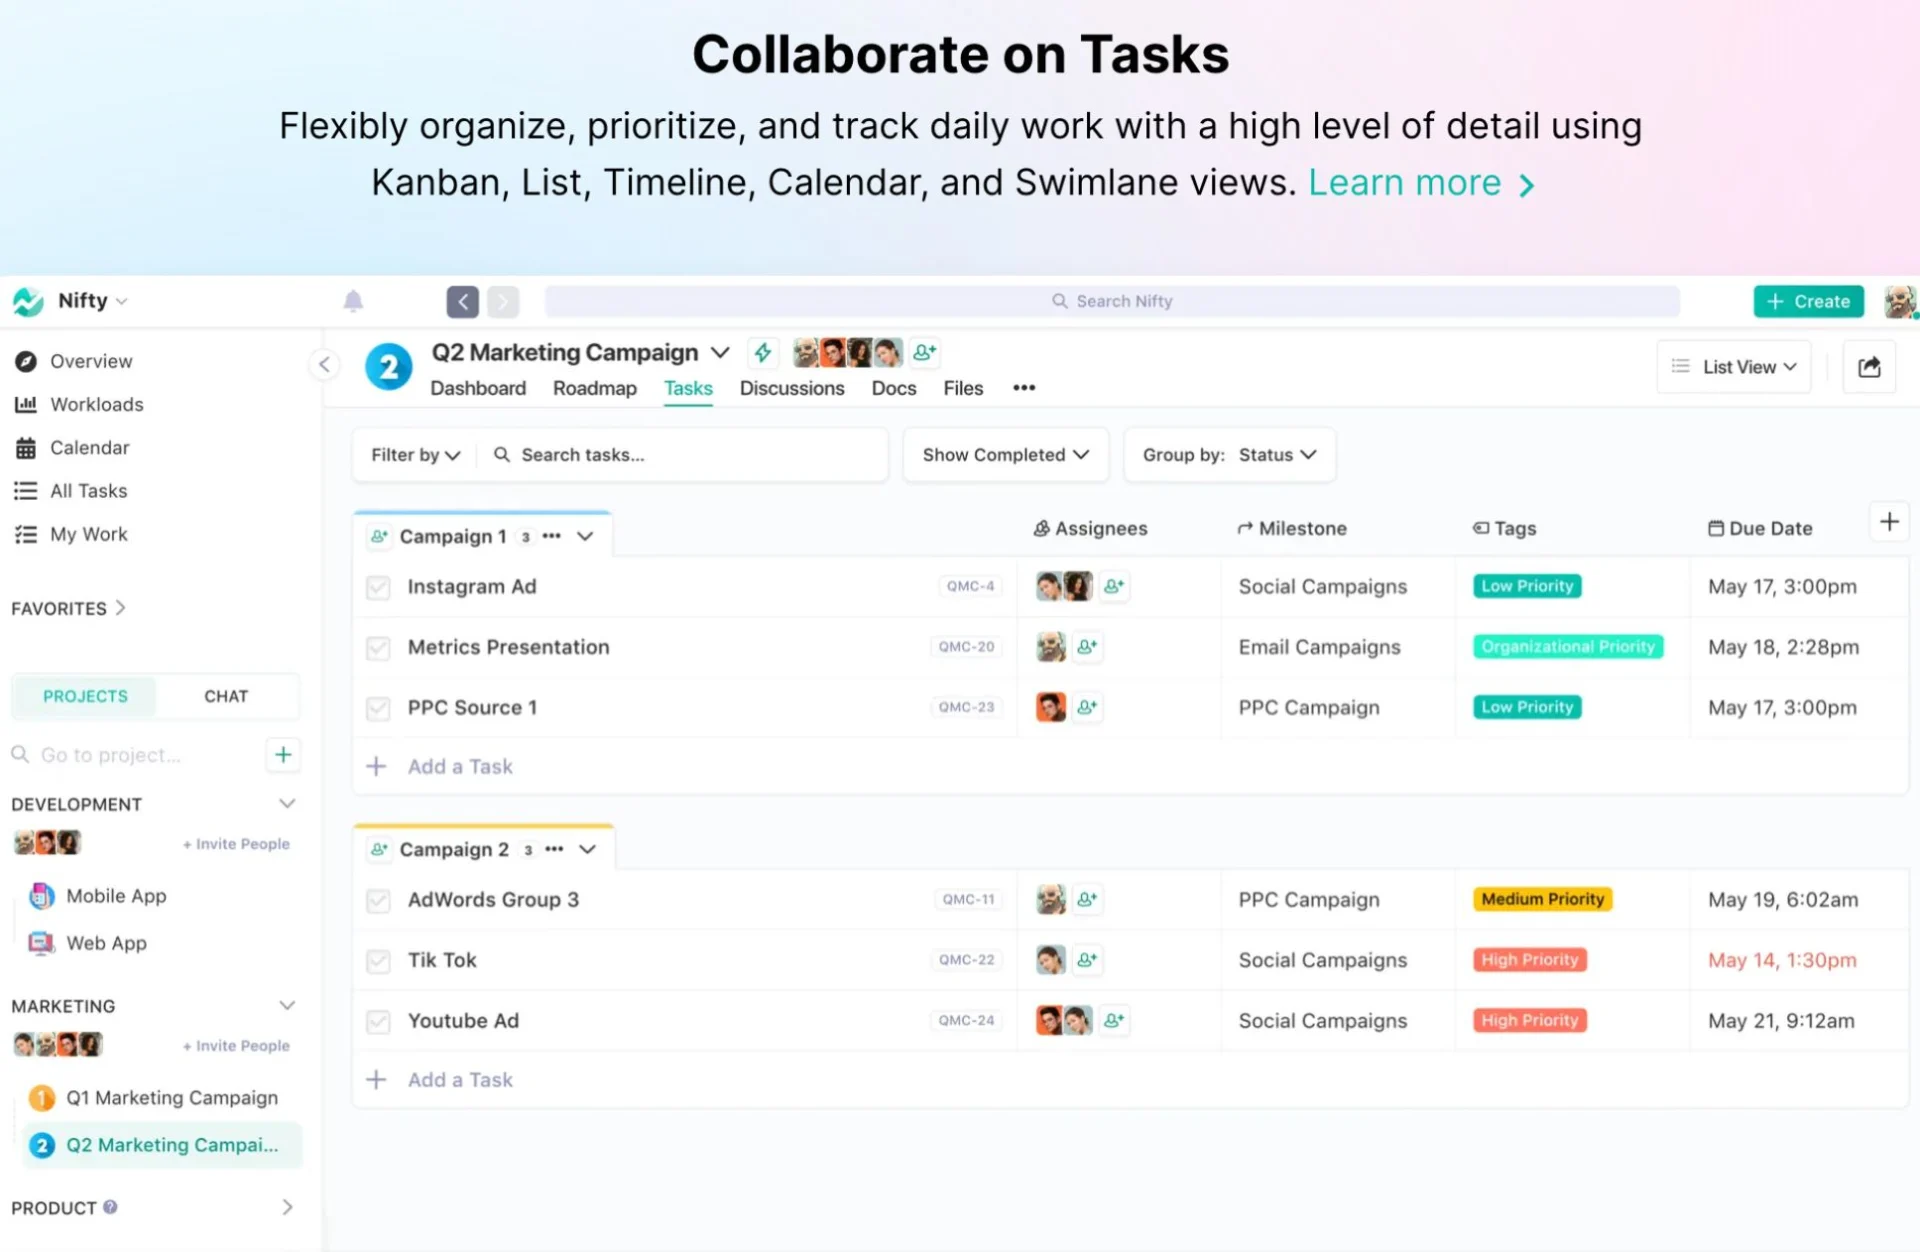 Nifty collaboration with tasks and projects.